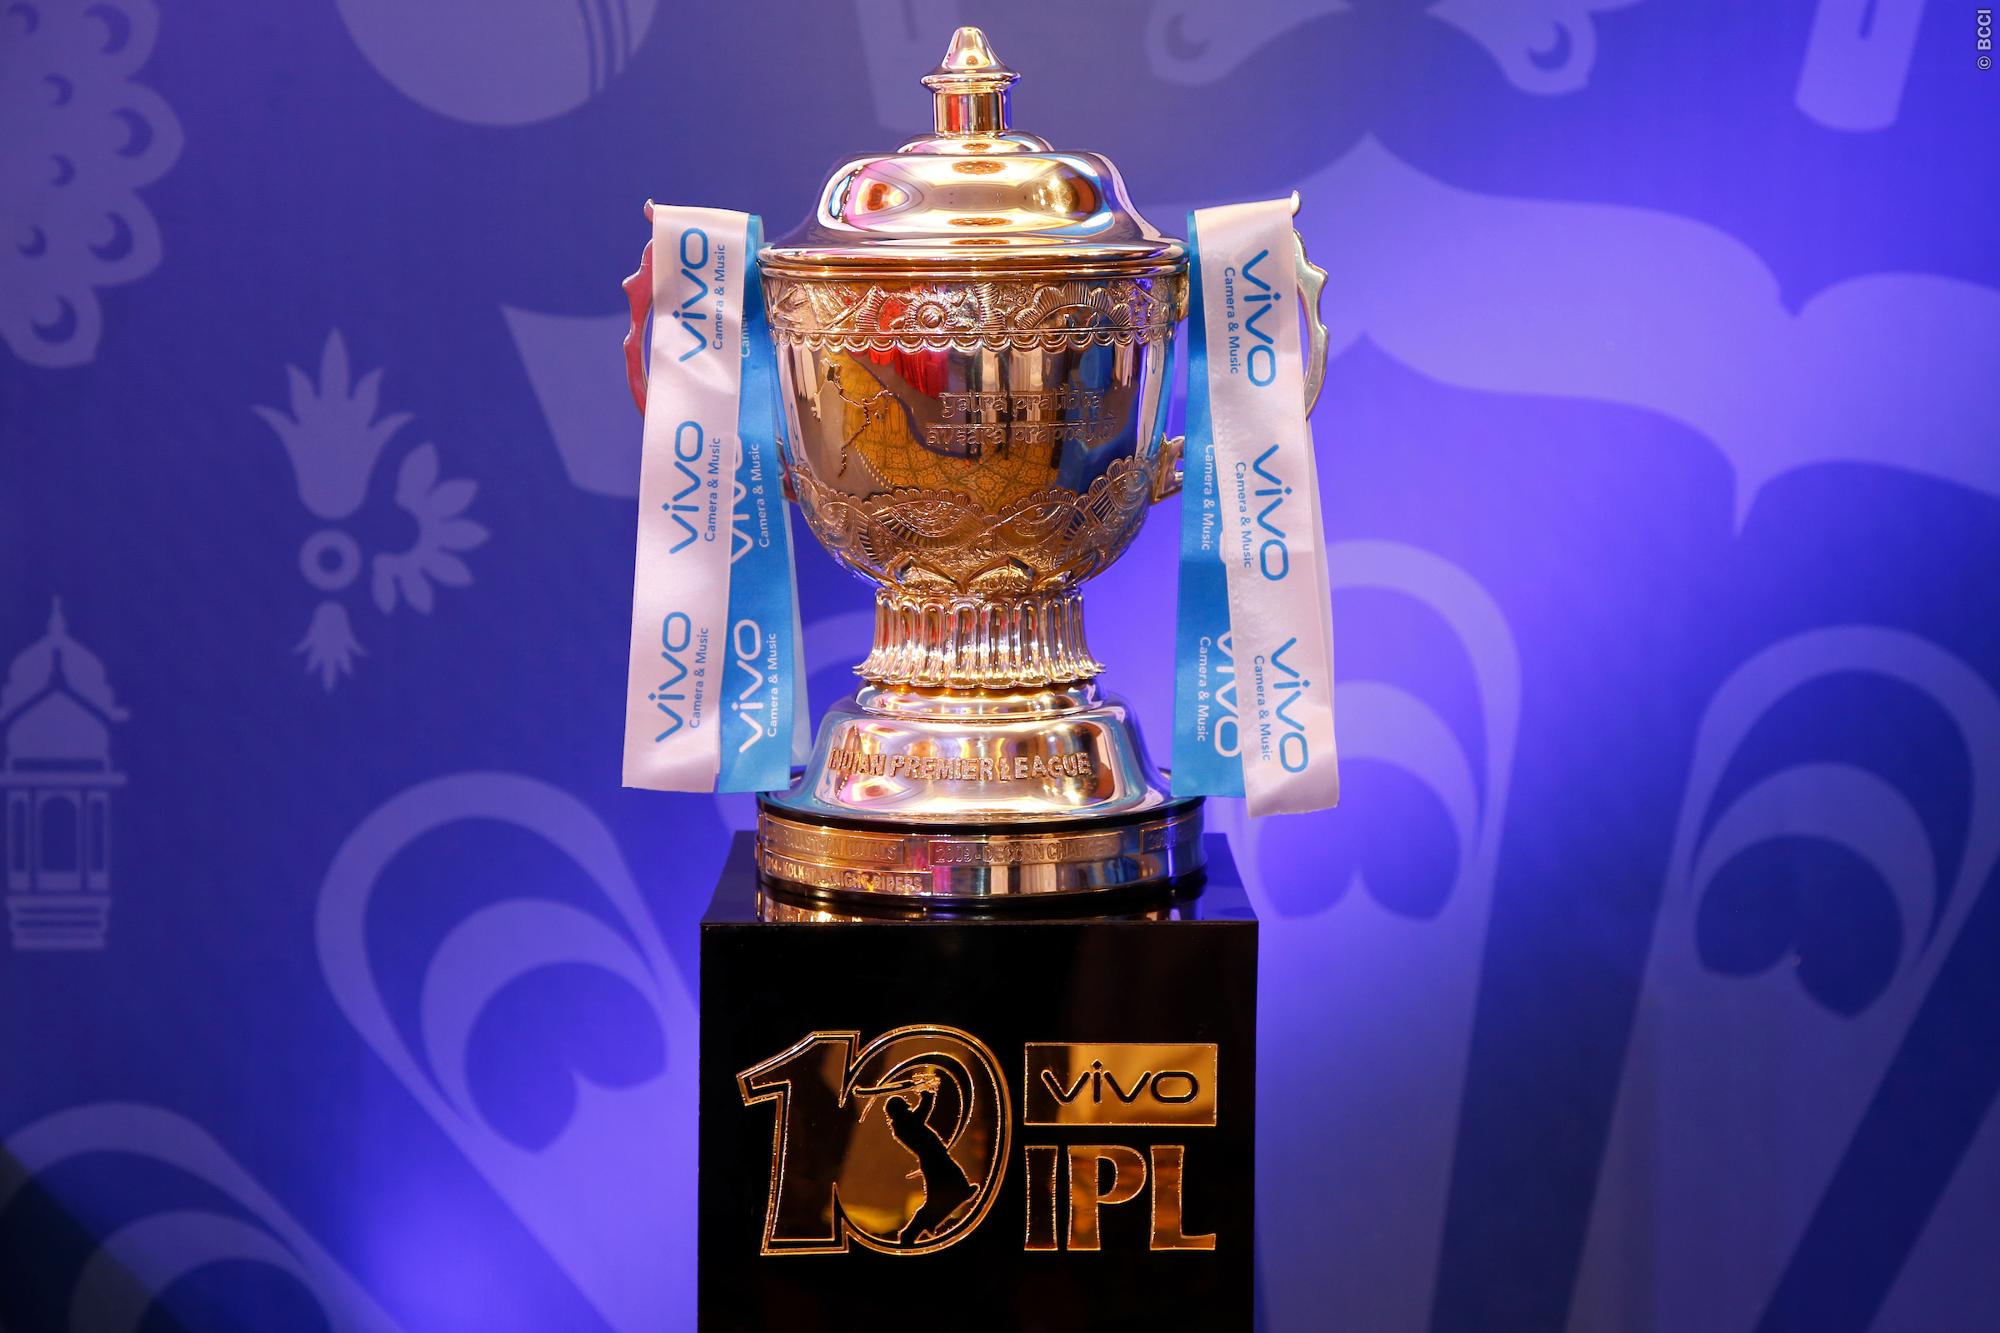 A view of the IPL Trophy